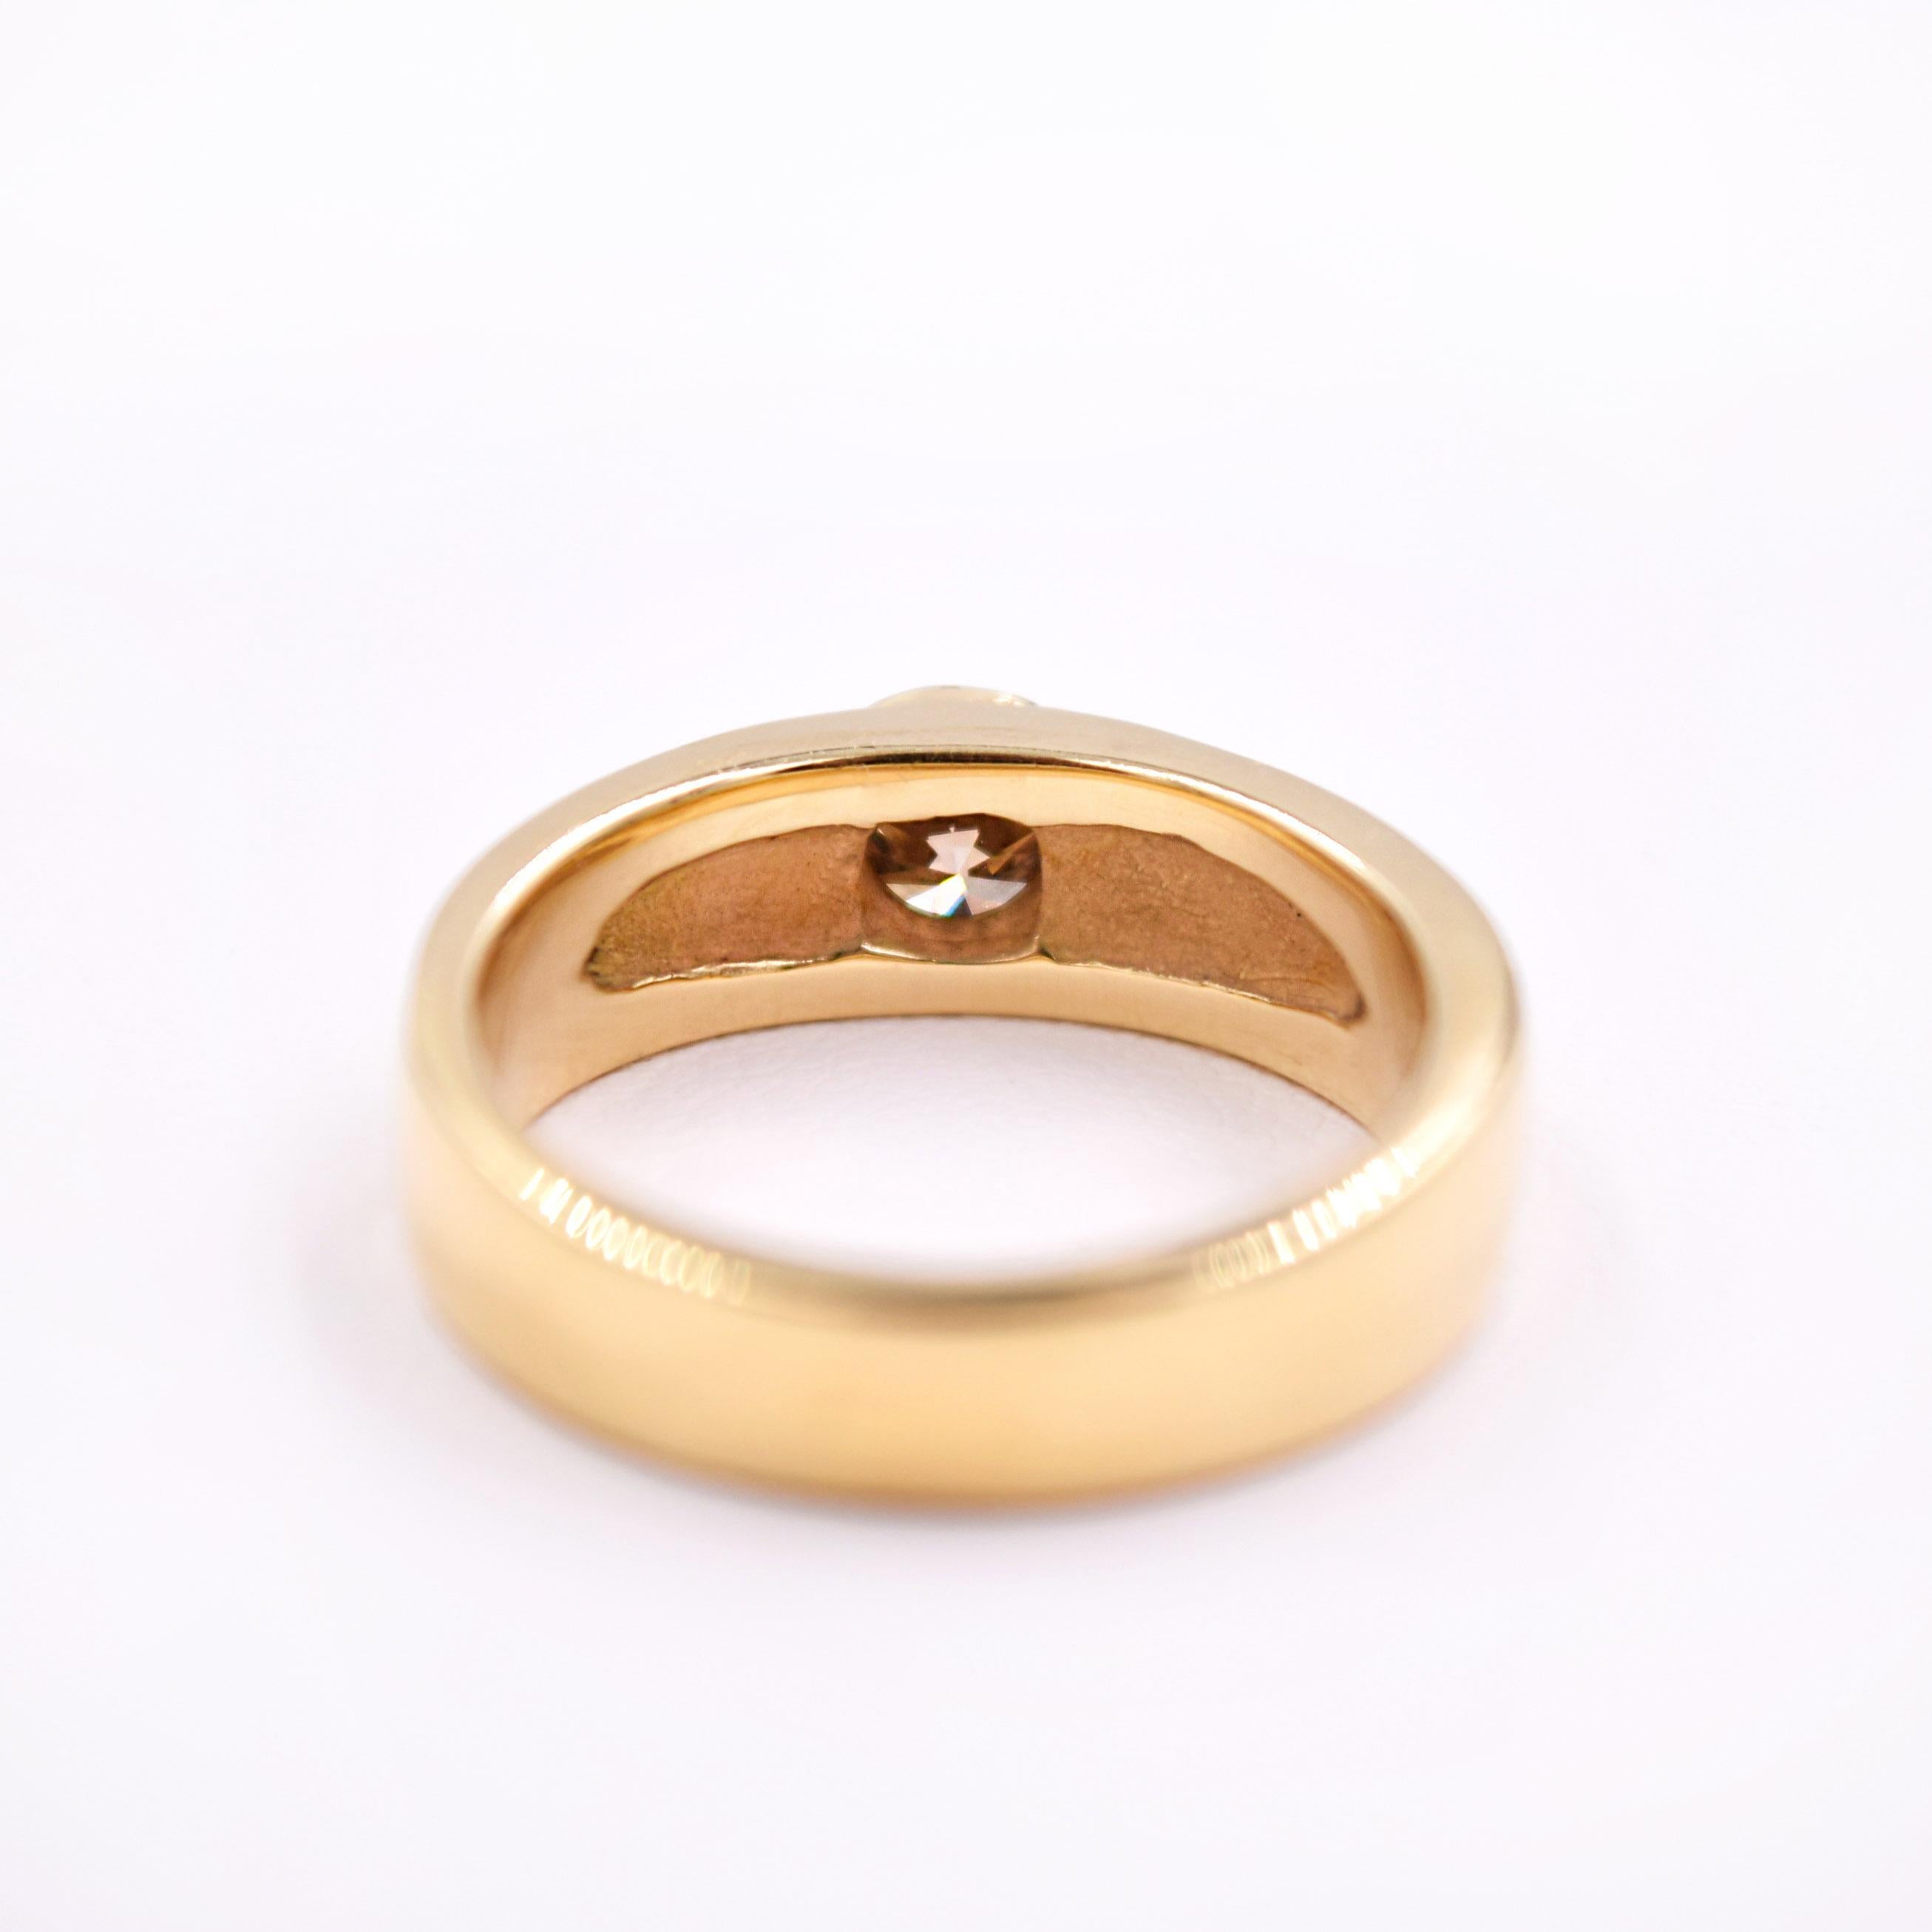 Brown Diamond and White Diamond Statement Ring in 18 Karat Yellow Gold In New Condition For Sale In Mill Valley, CA